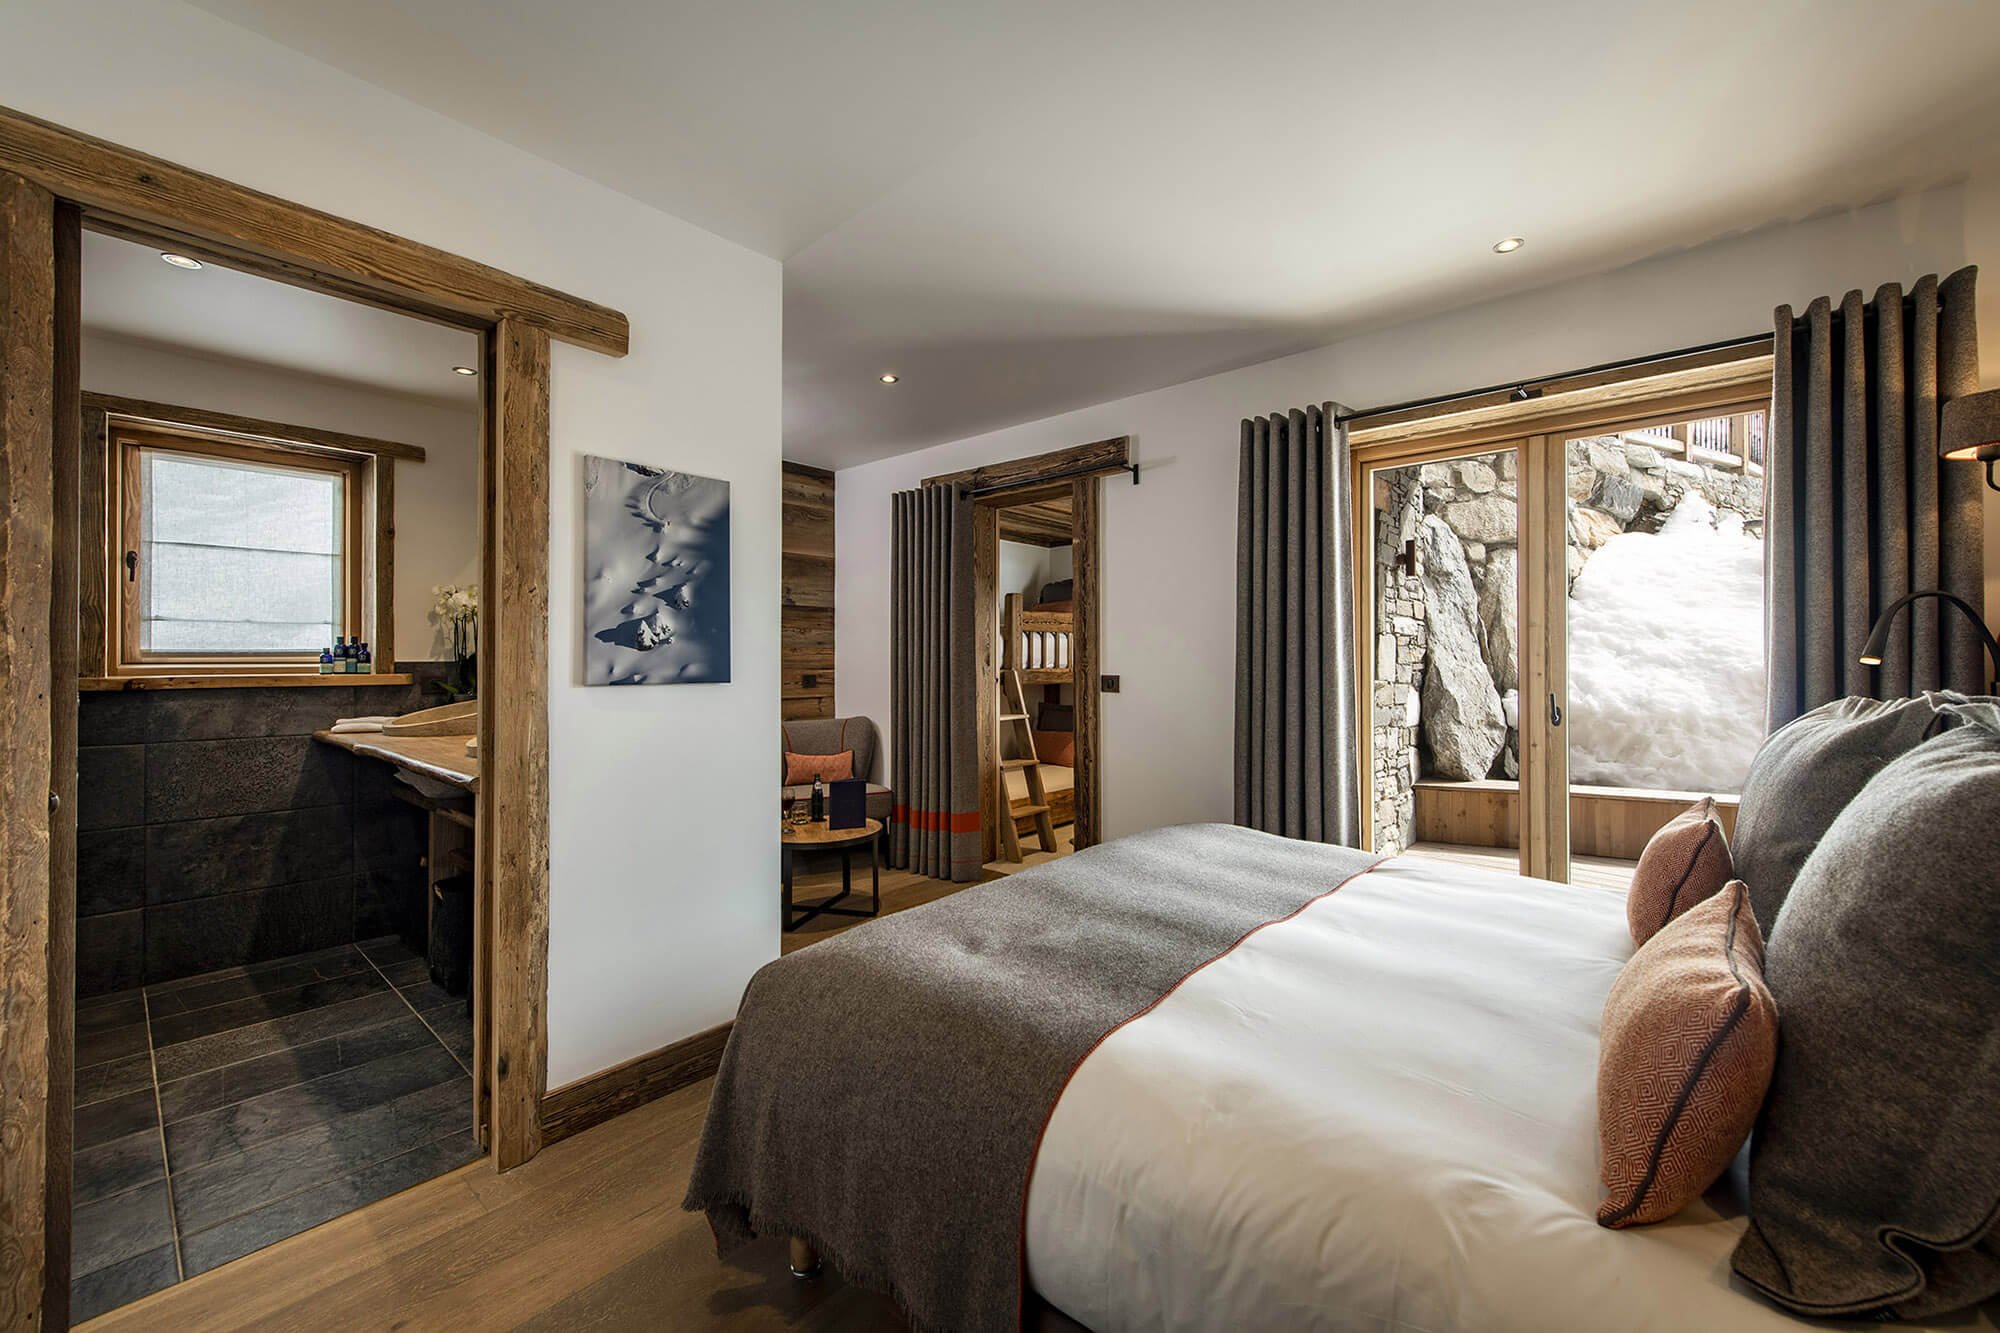 Luxury chalet in Val d'Isère at the foot of the slopes with hotel service, pool and spa